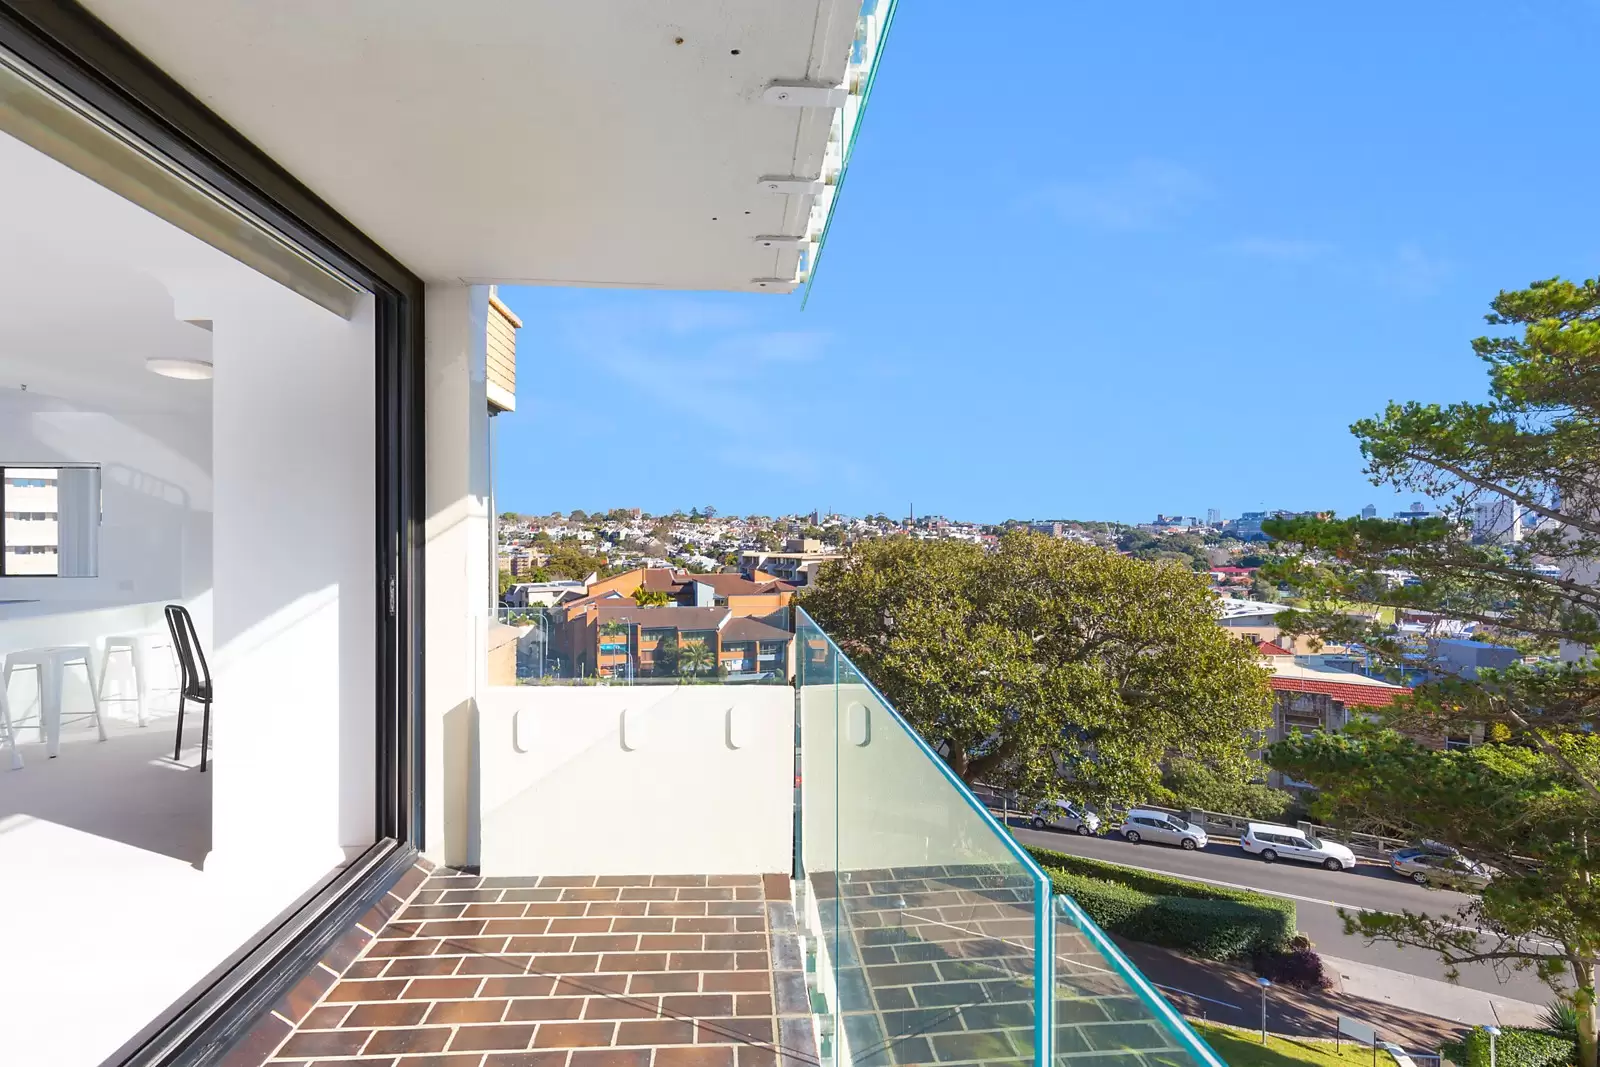 Photo #3: 3 Darling Point Road, Darling Point - For Sale by Sydney Sotheby's International Realty